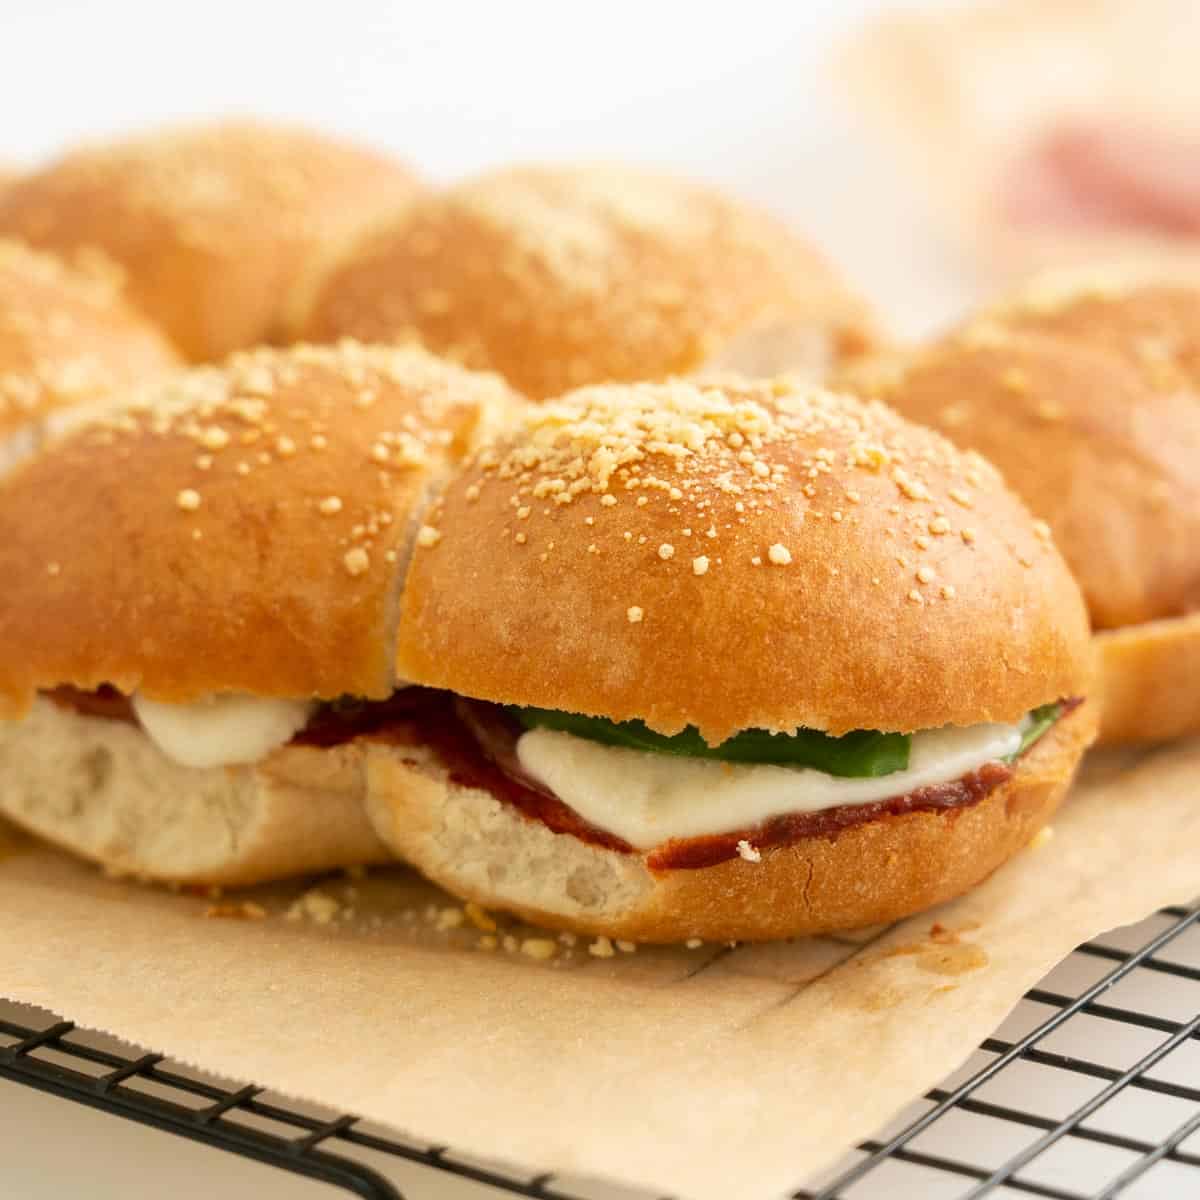 Toasted sliders filled with salami melted mozzarella and spinach leaves.